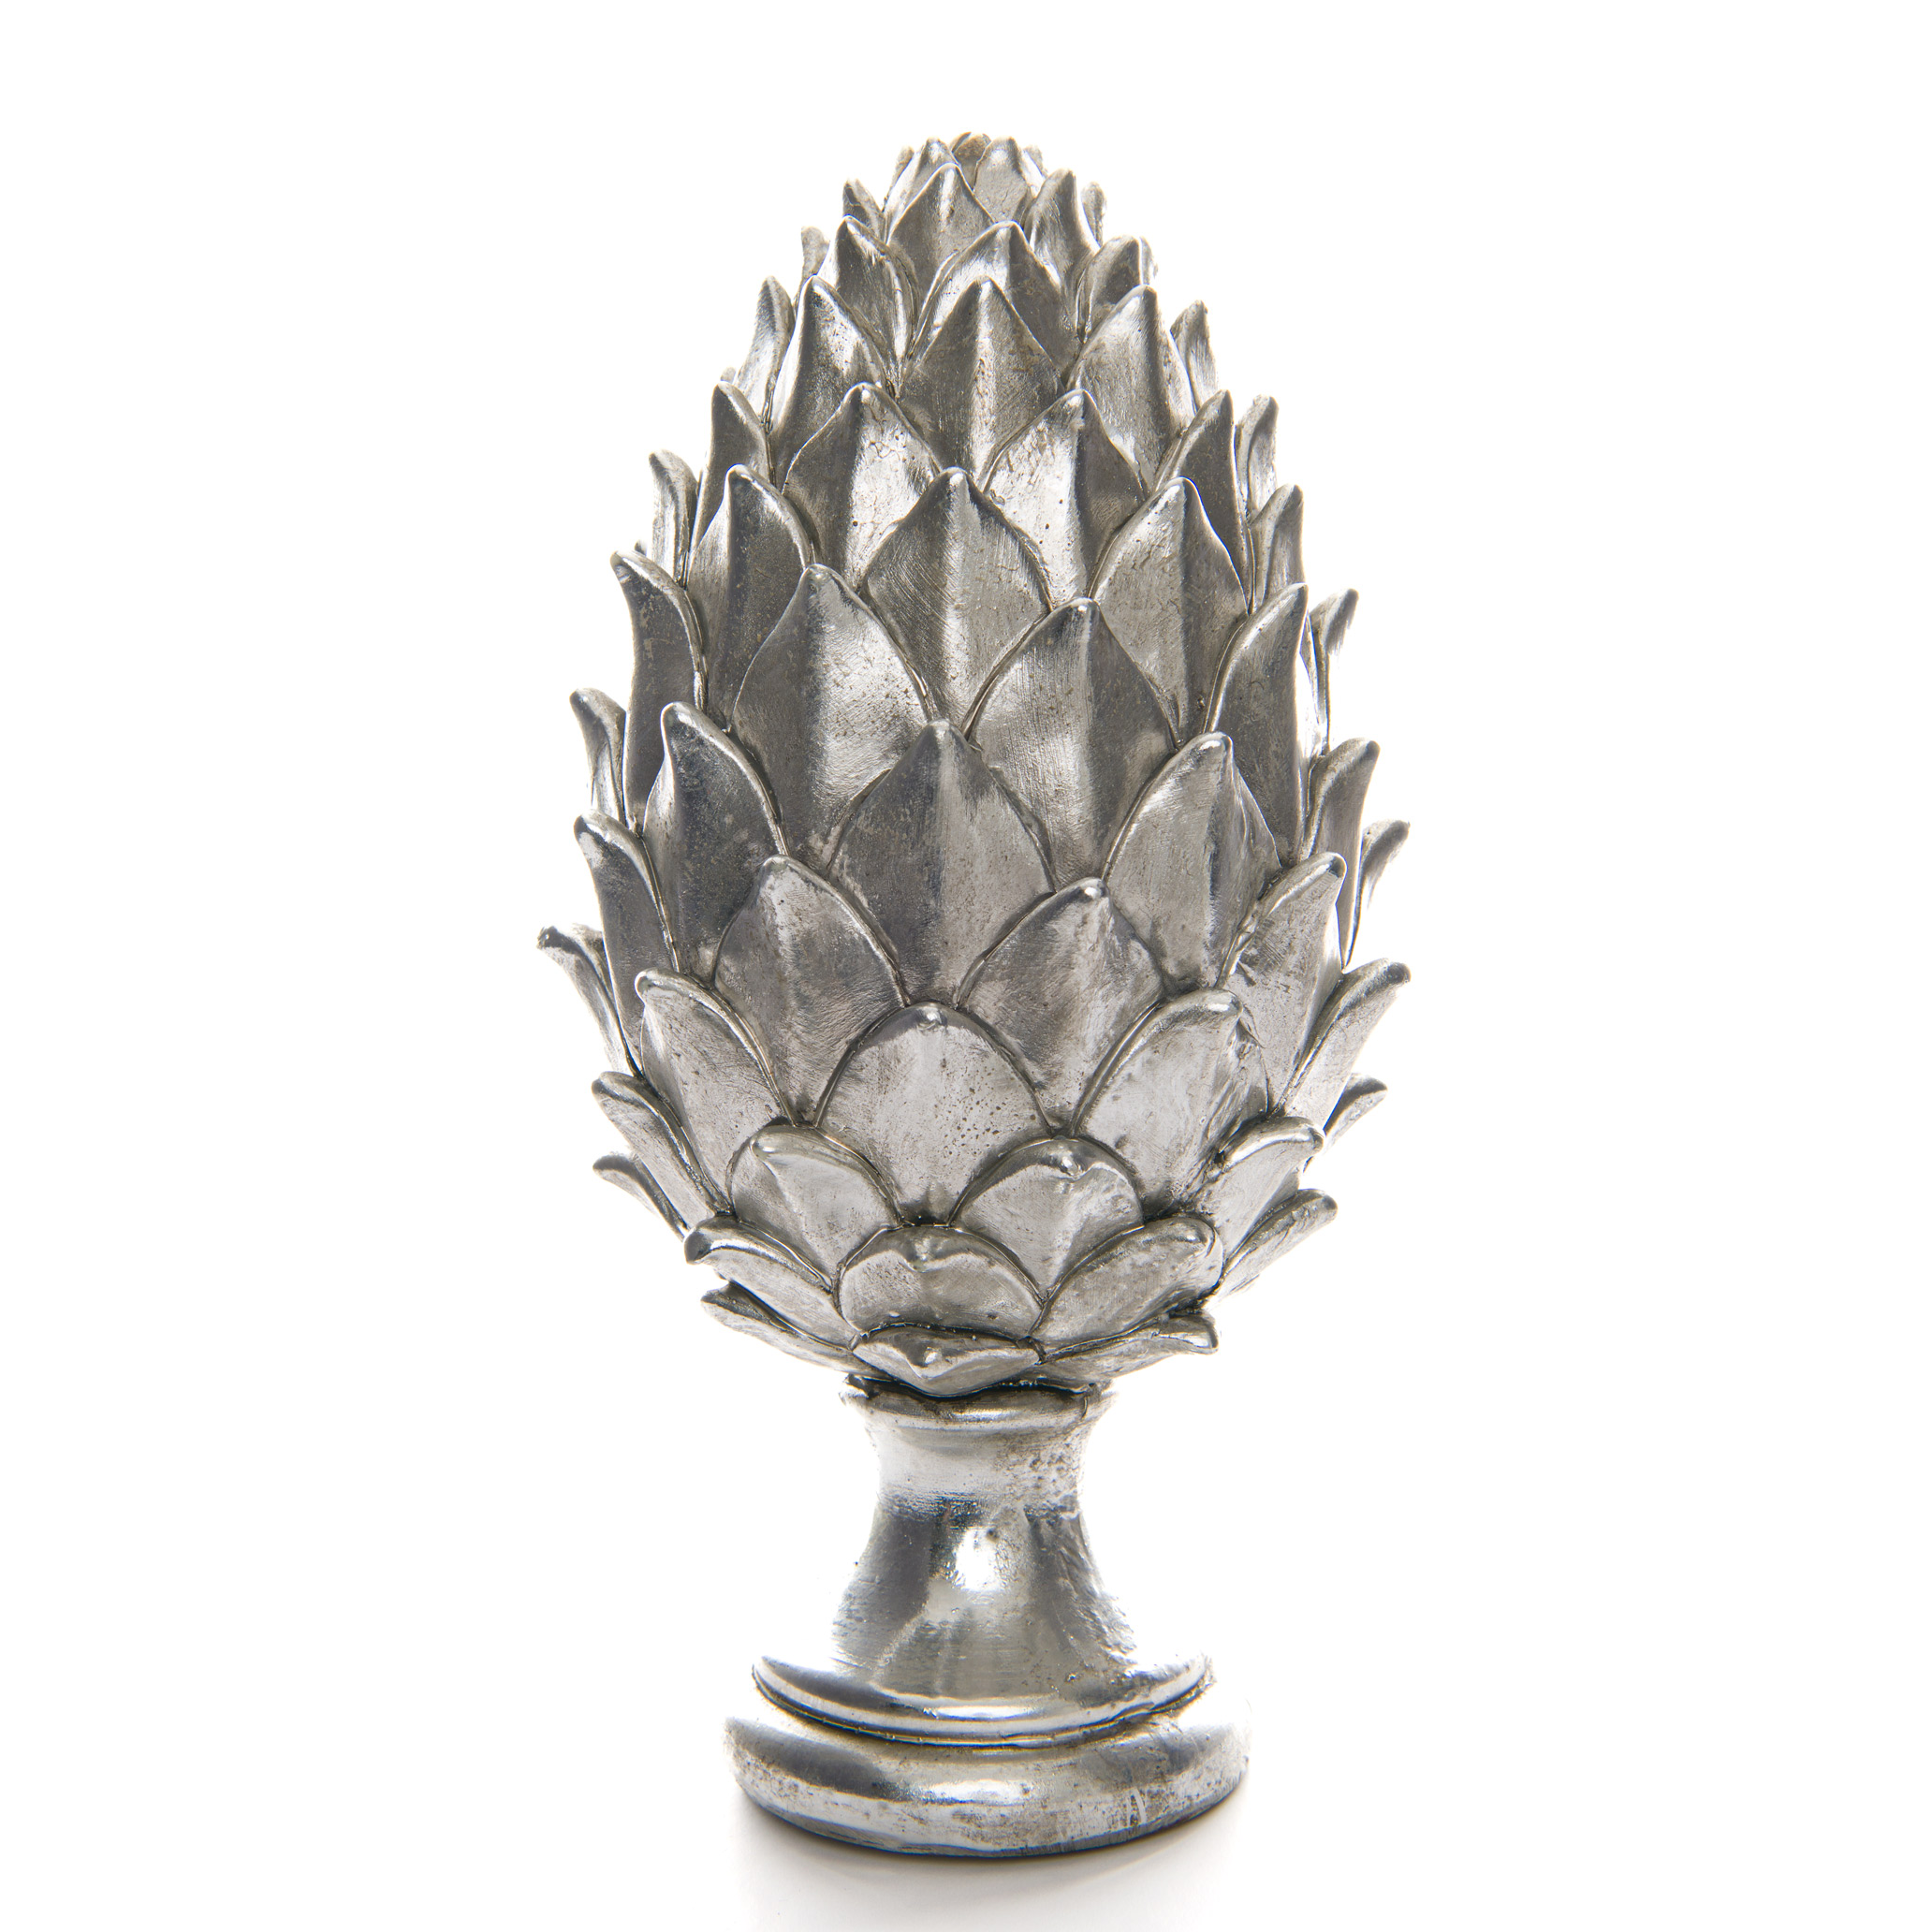 Tall Silver Pinecone Finial - Image 1